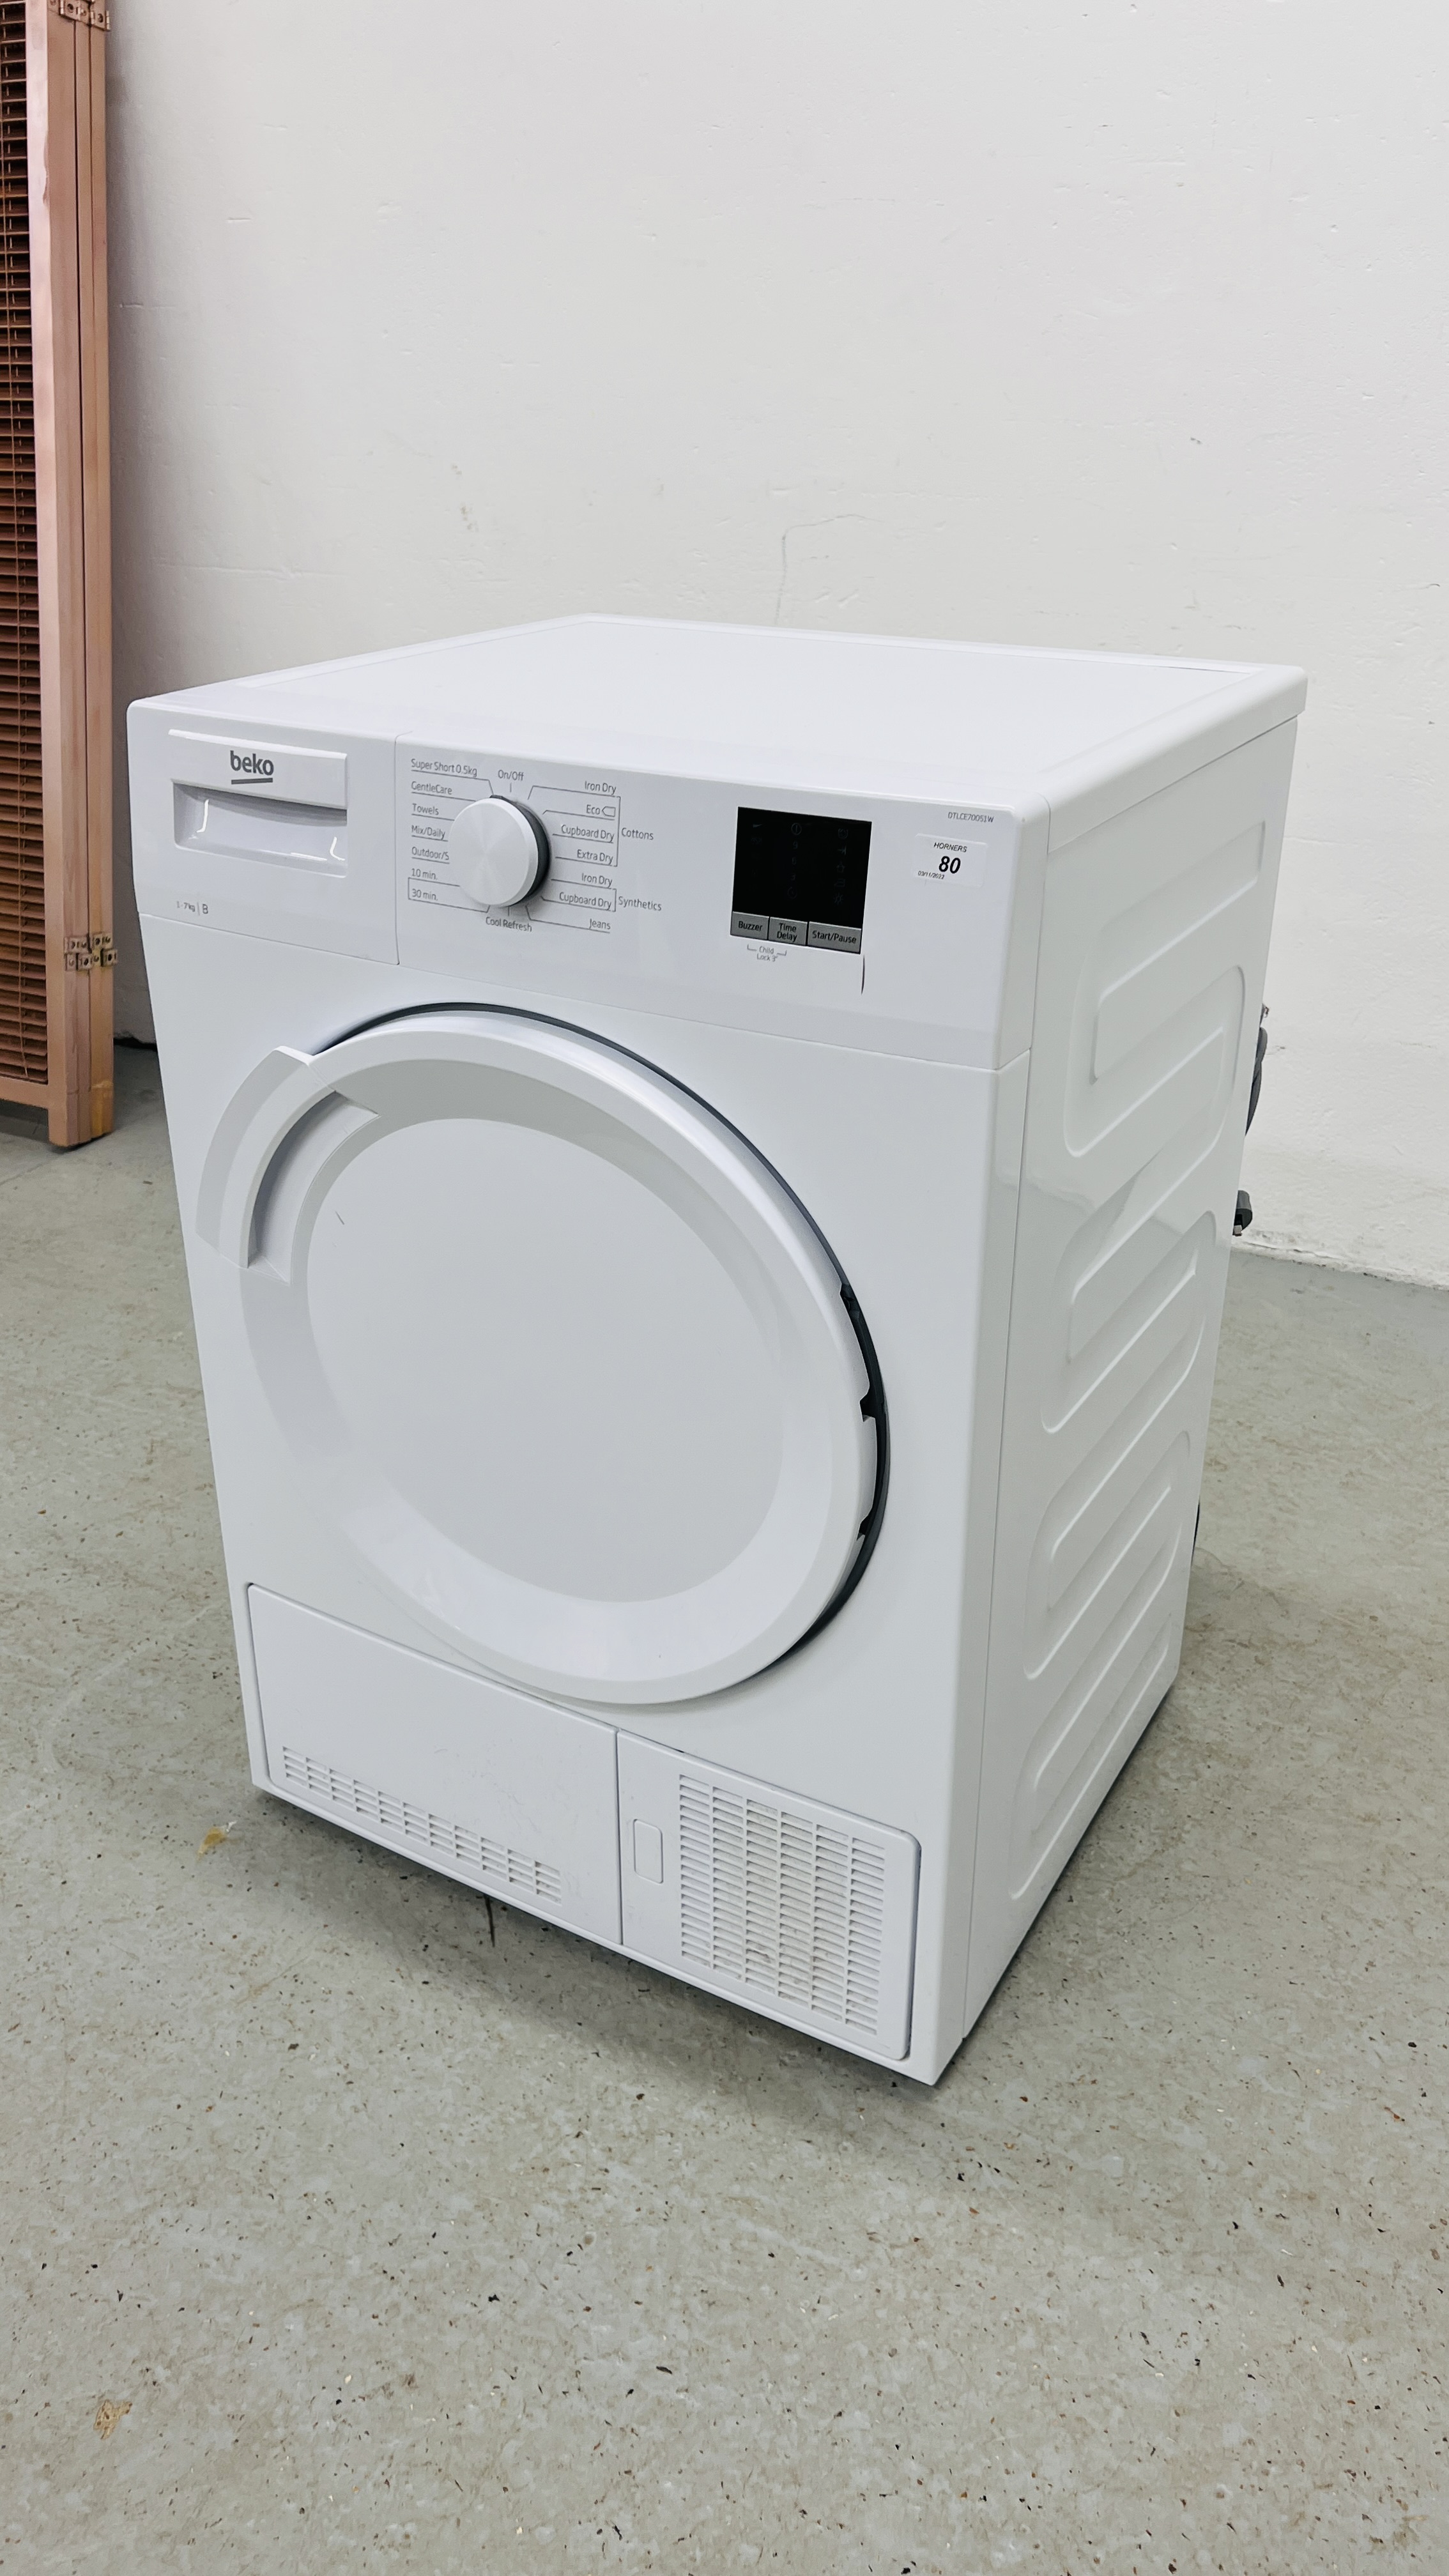 A BEKO 7KG CONDENSER TUMBLE DRYER - SOLD AS SEEN - Image 6 of 7